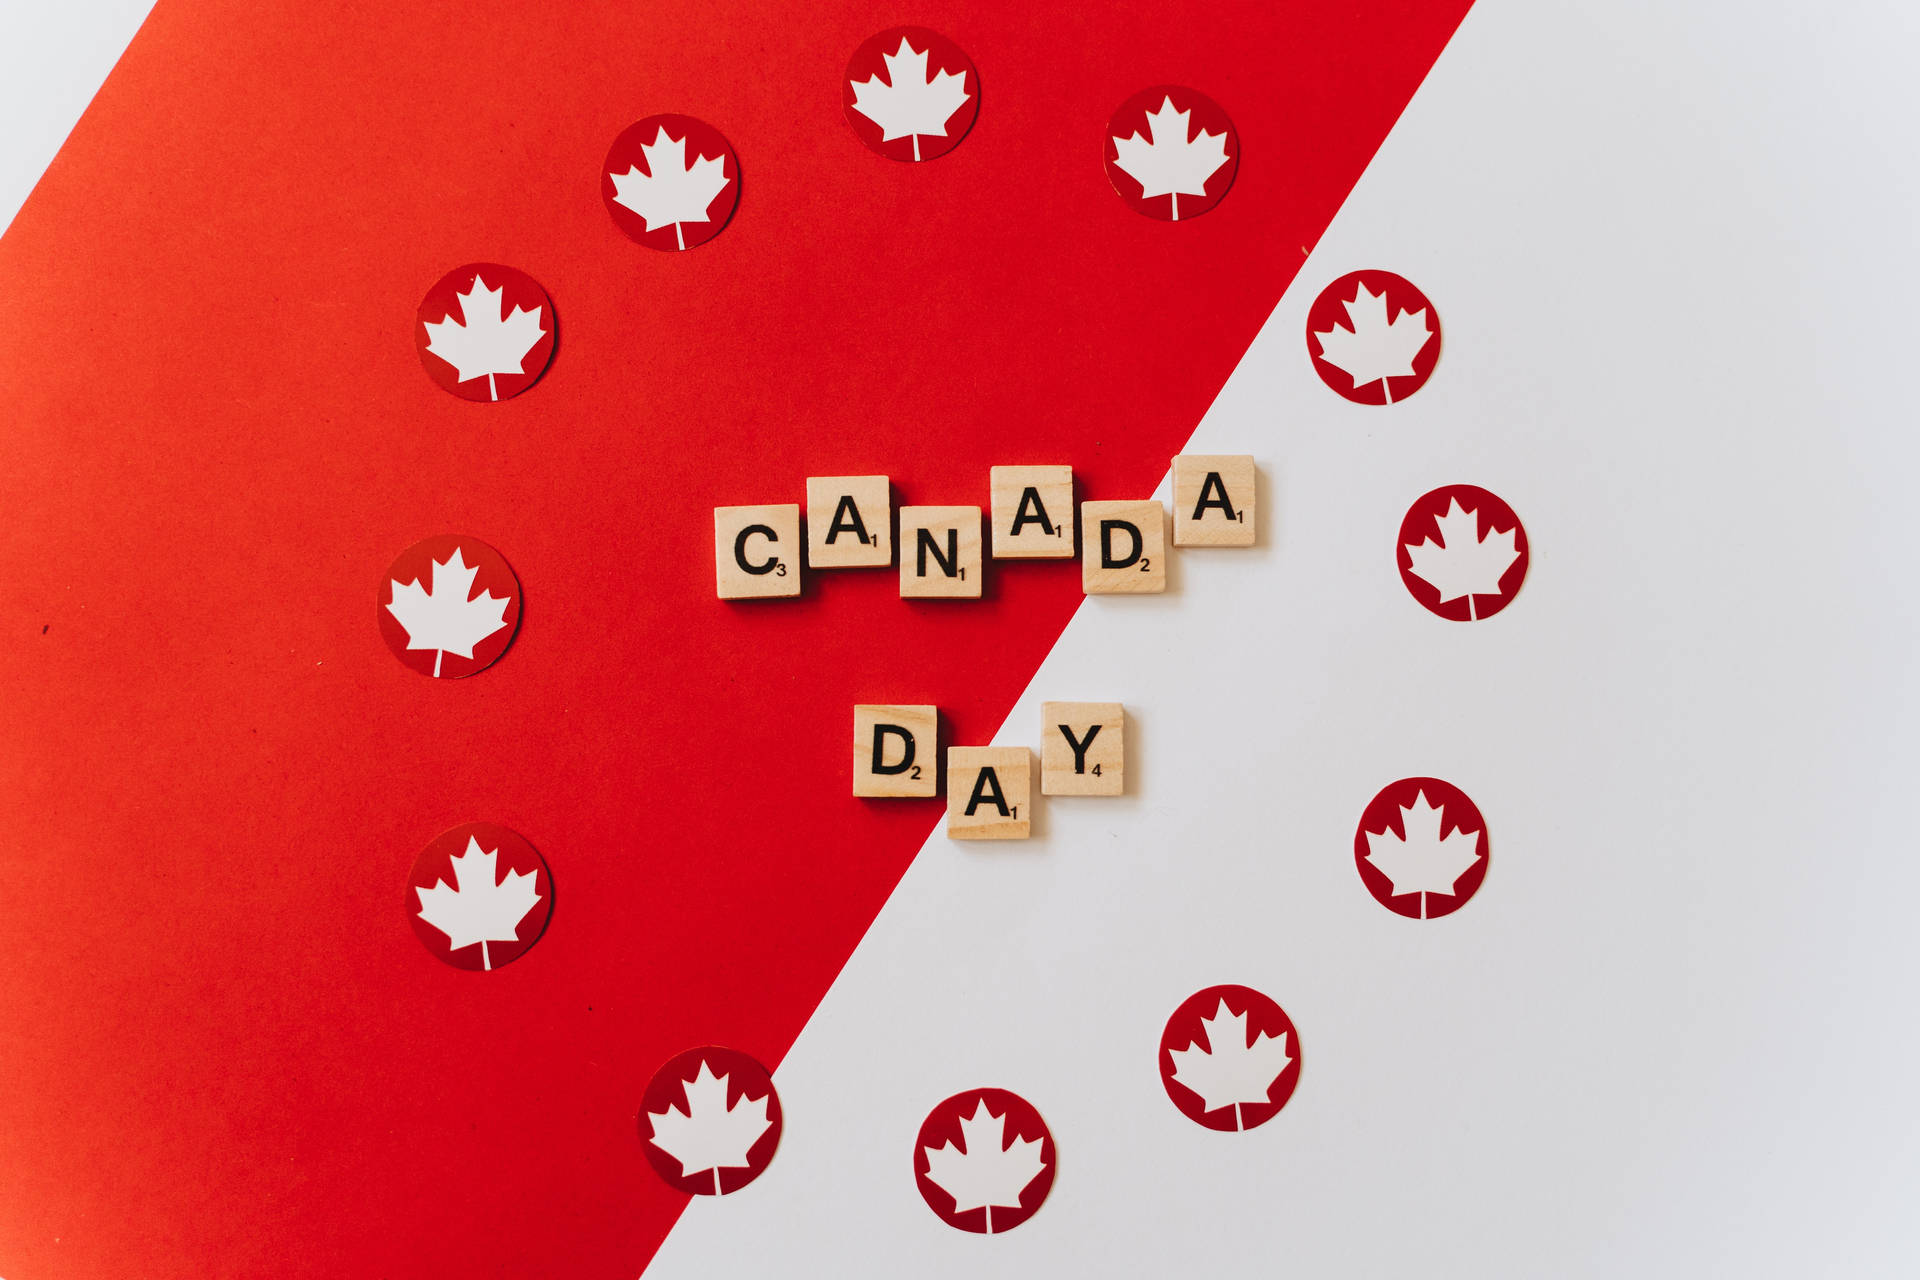 Canadian Themed Canada Day Wallpaper